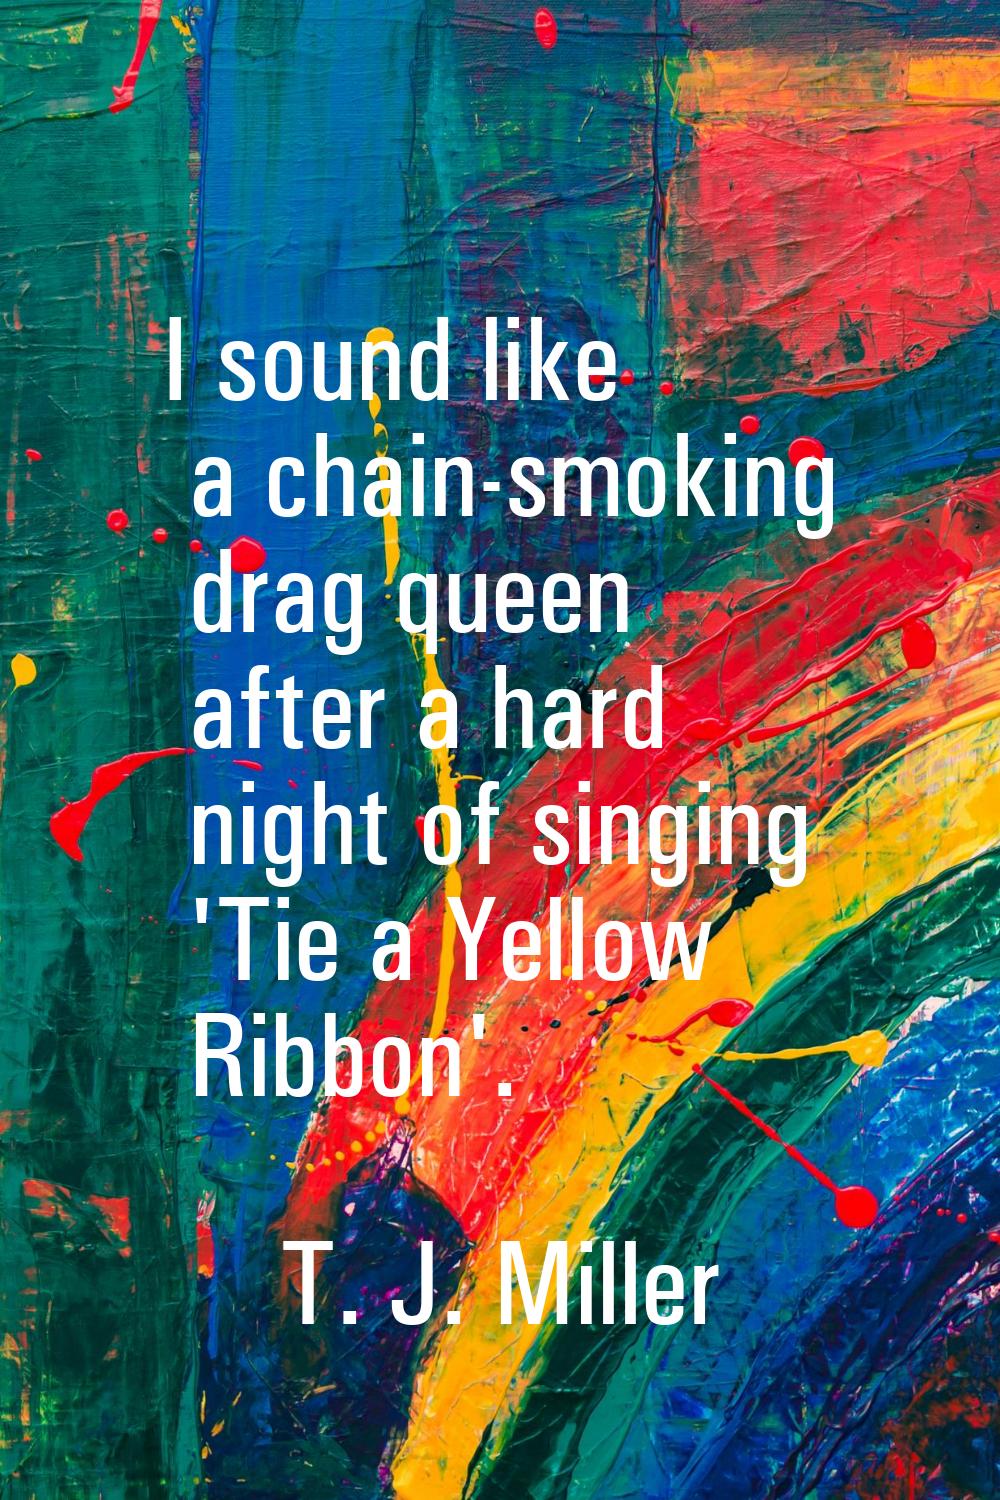 I sound like a chain-smoking drag queen after a hard night of singing 'Tie a Yellow Ribbon'.